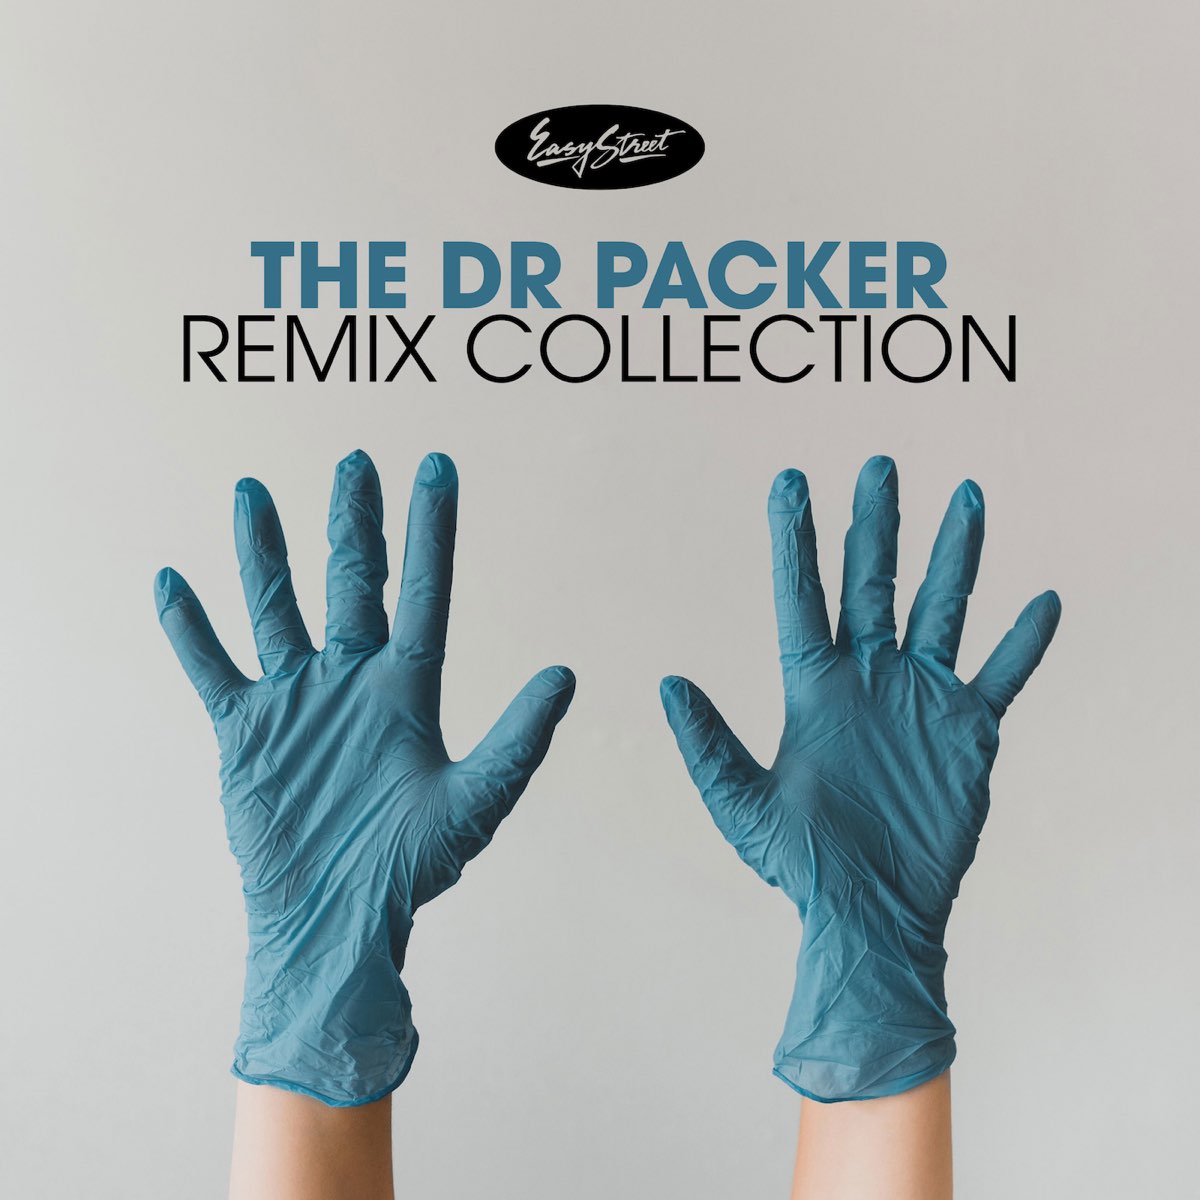 Remix collection. Kano - Unconditional lover (Dr Packer Remix).